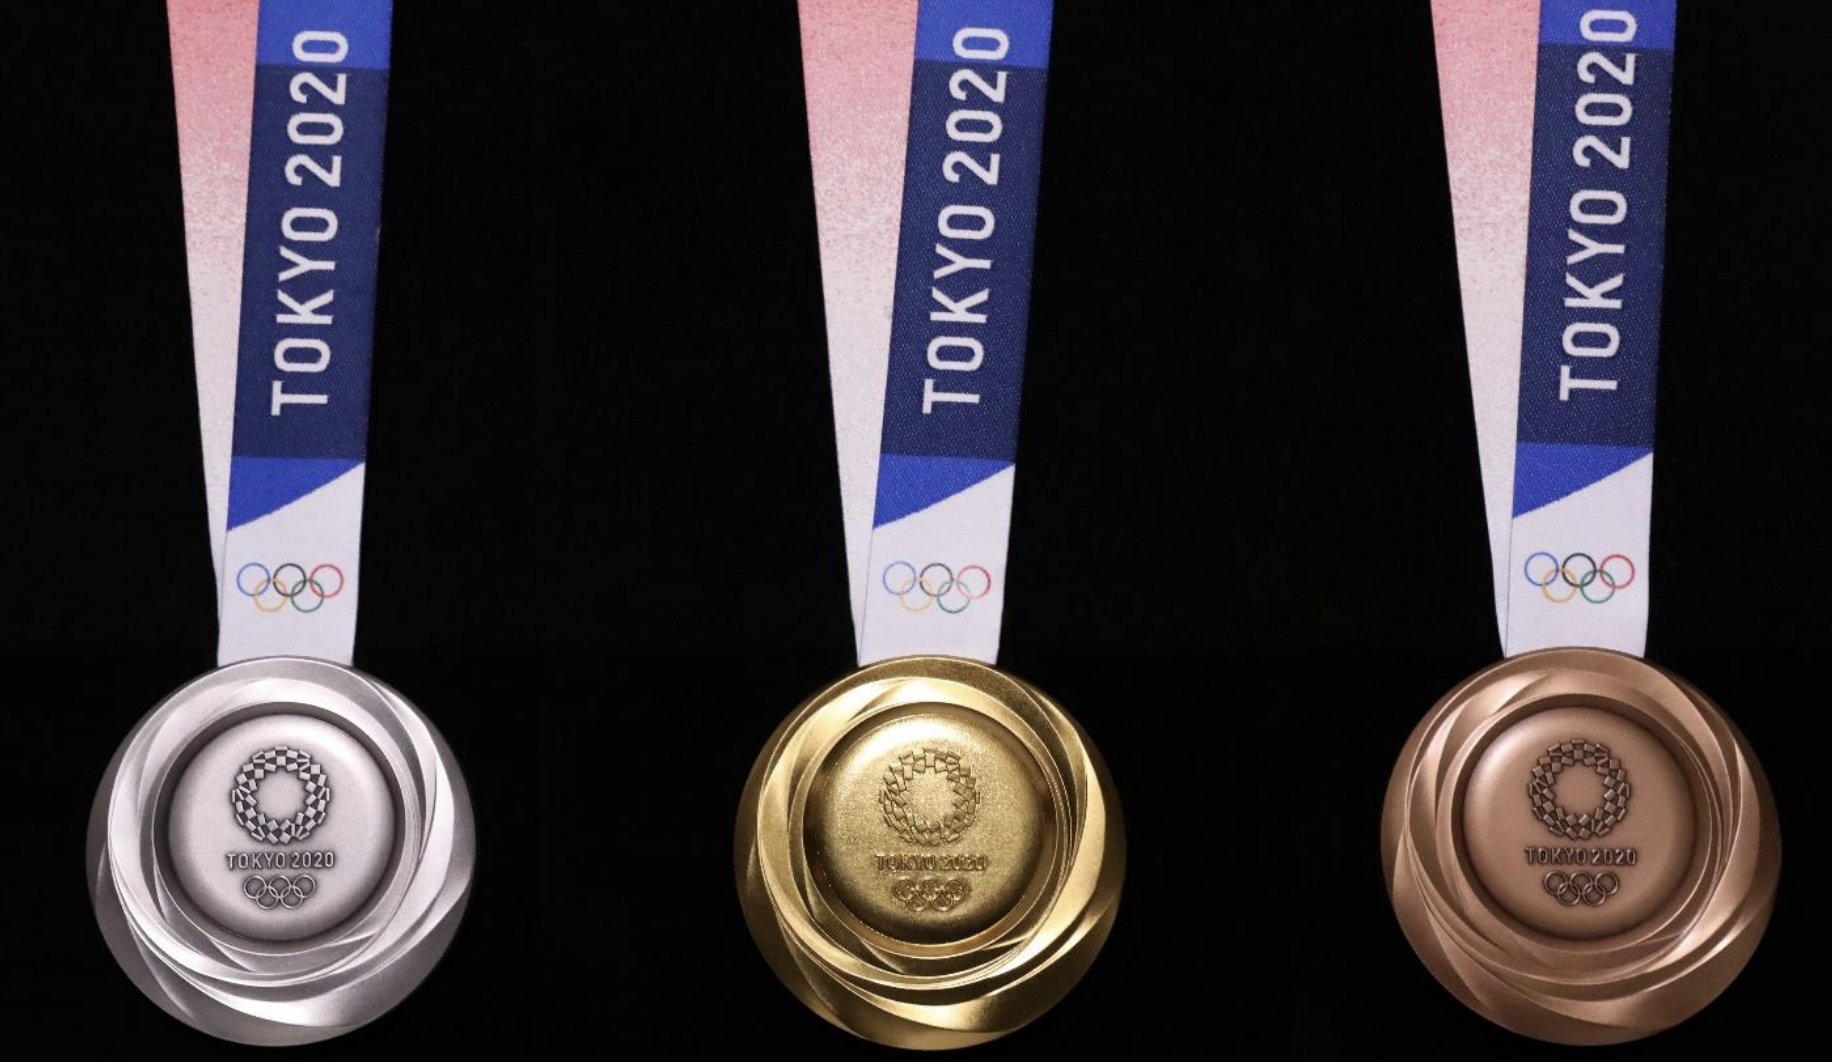 Tokyo 2020: Olympic medals made from old smartphones, laptops